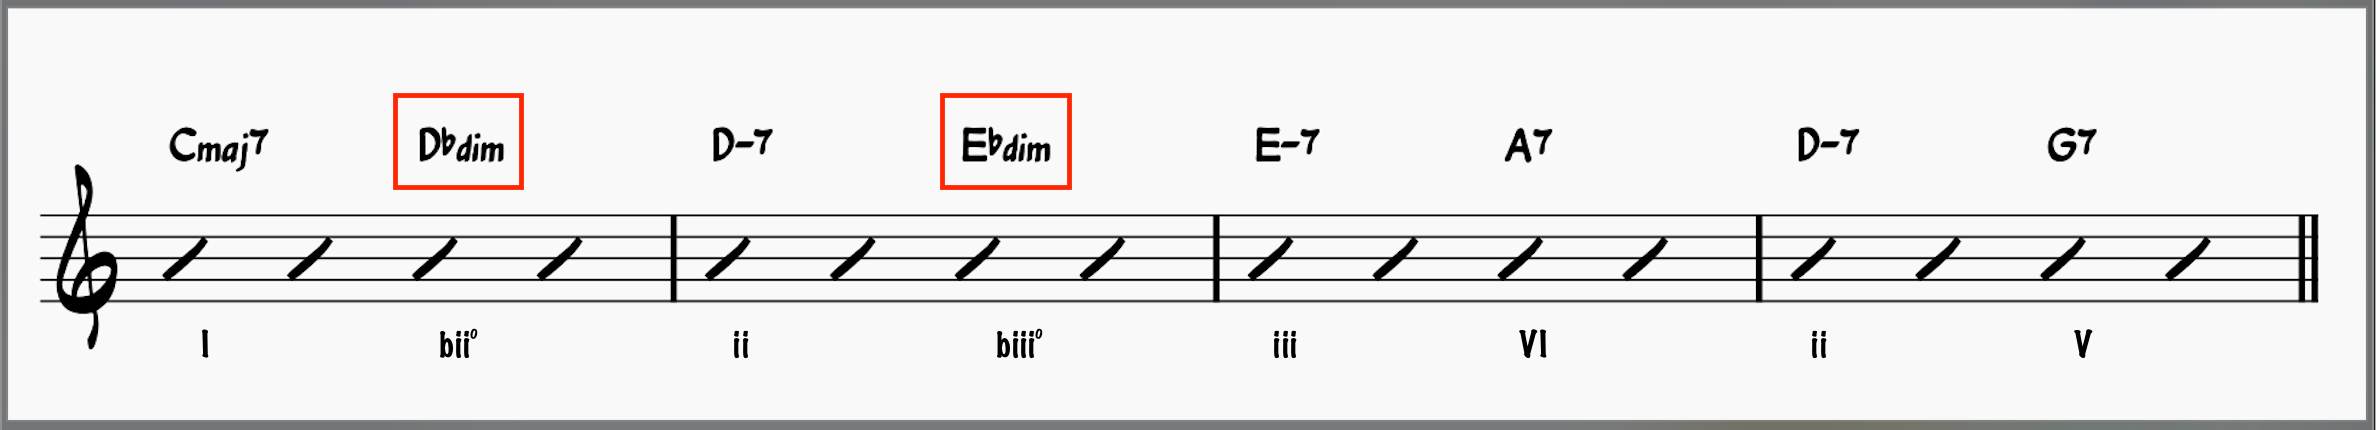 chord progression showing diminished passing chords 